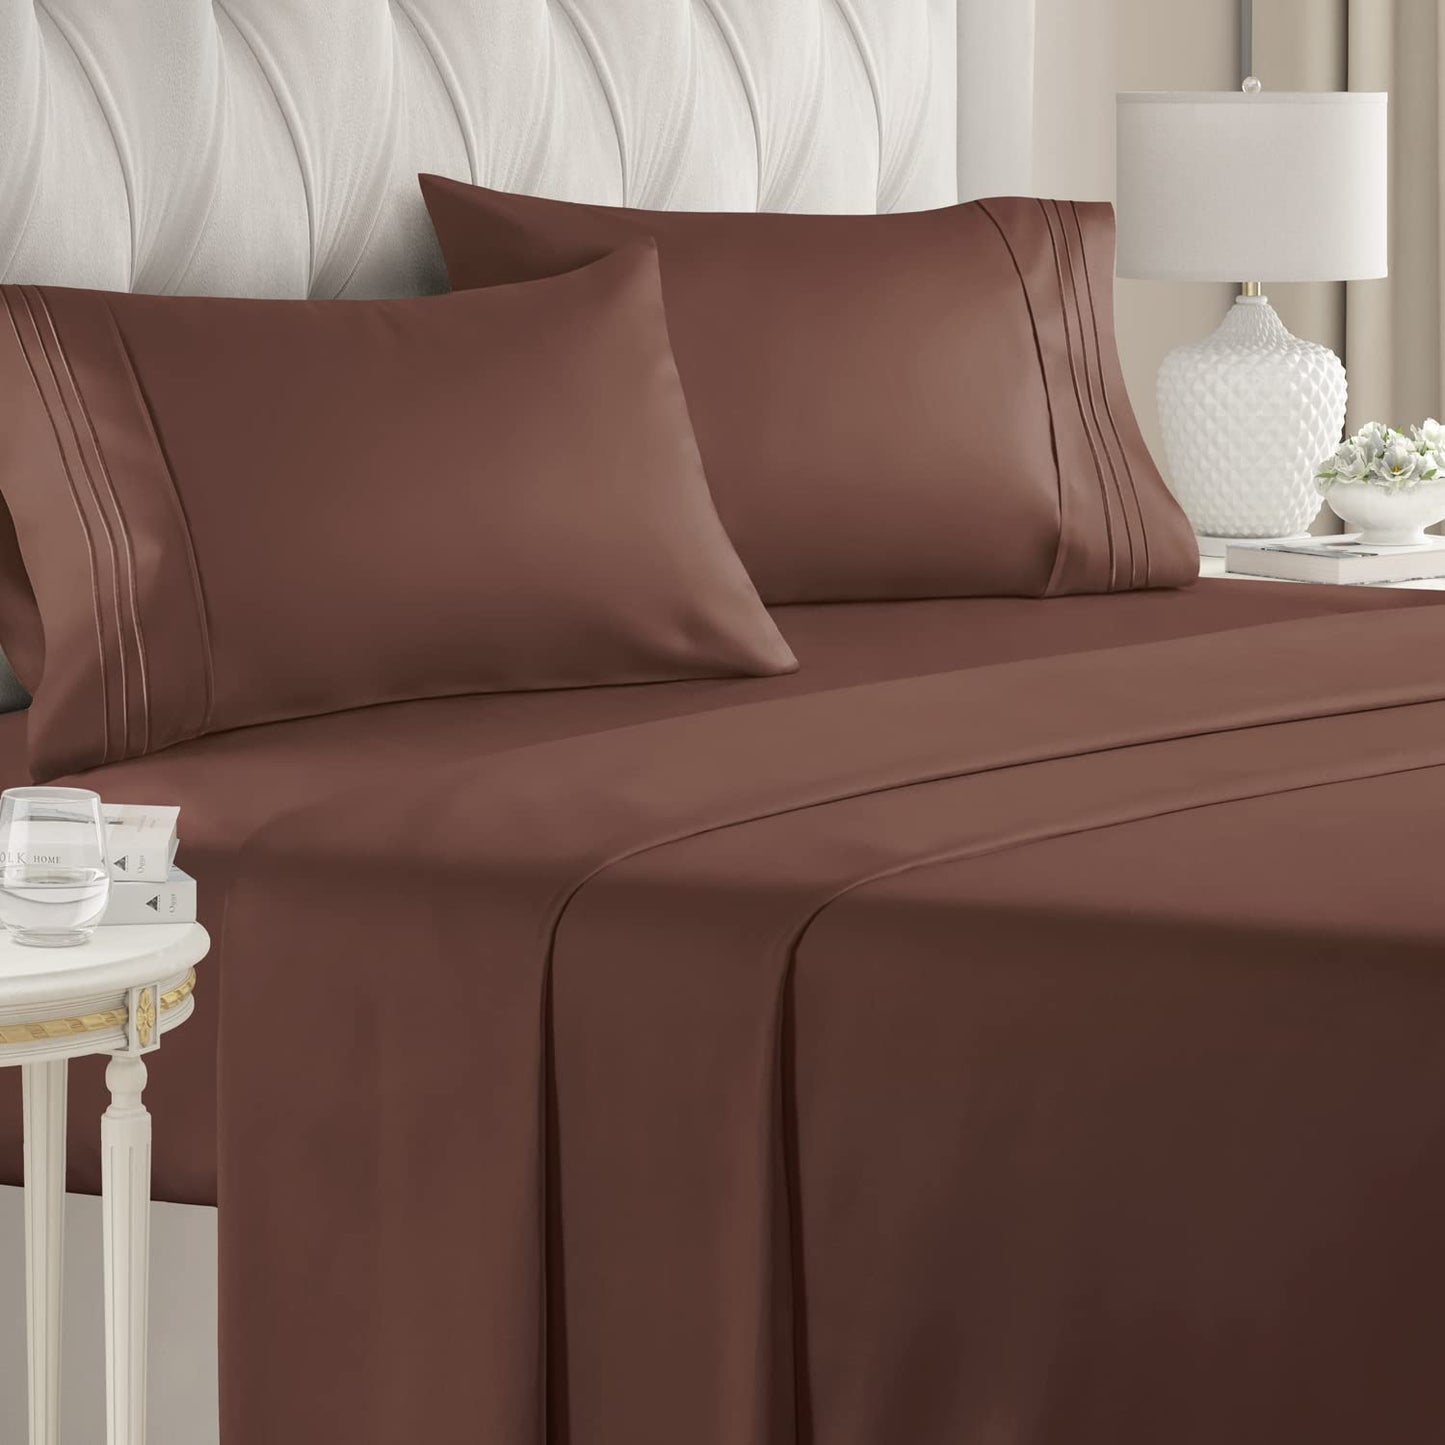 4 Piece Bed Sheet Set 100% Egyptian Cotton 1000-TC 24 inch Deep Pocket Chocolate Color